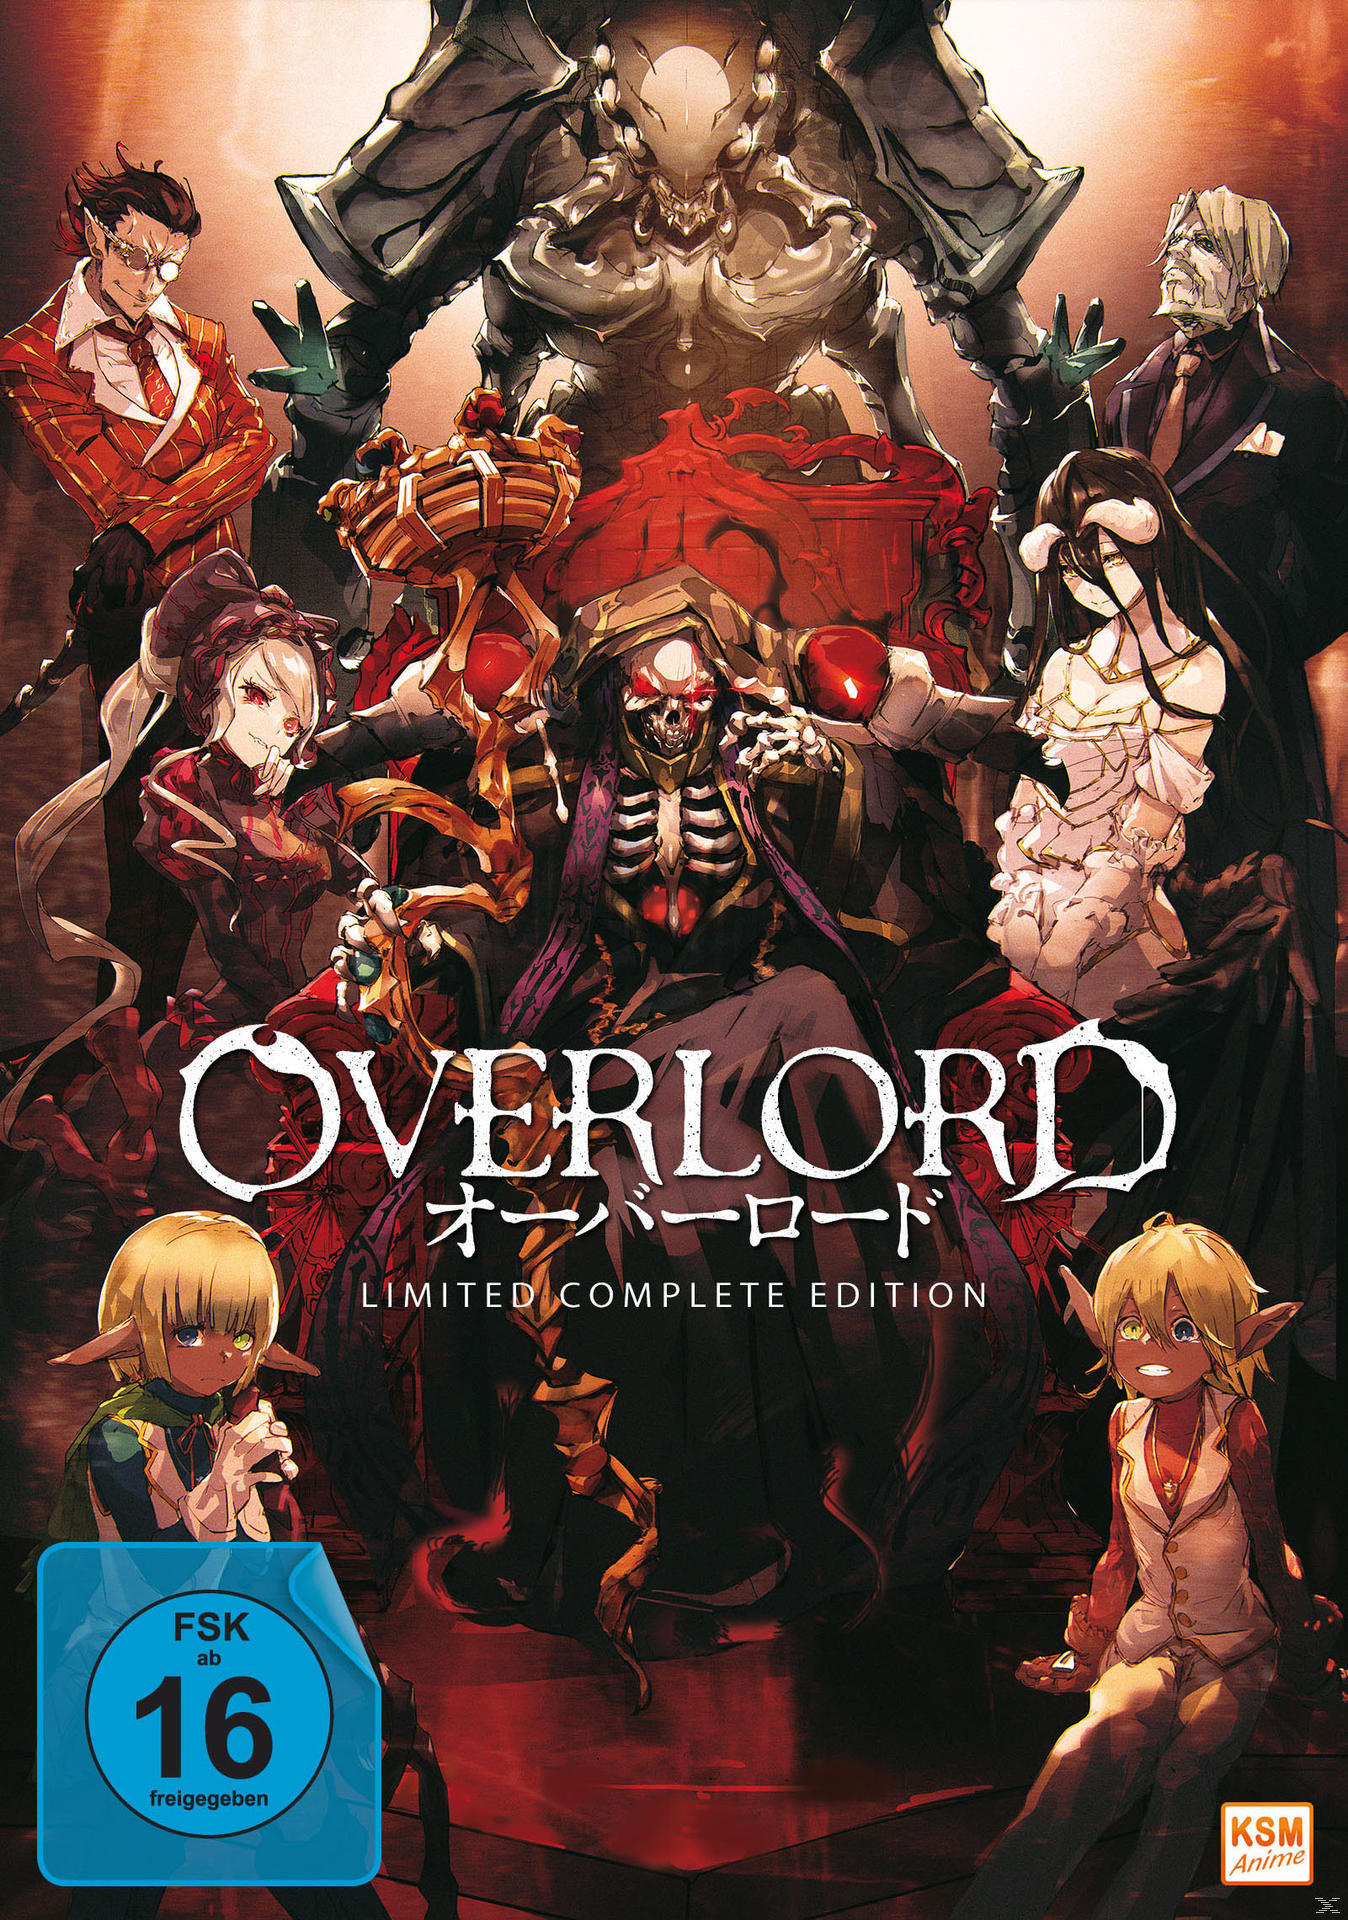 Episoden) Overlord Edition DVD (13 Complete -